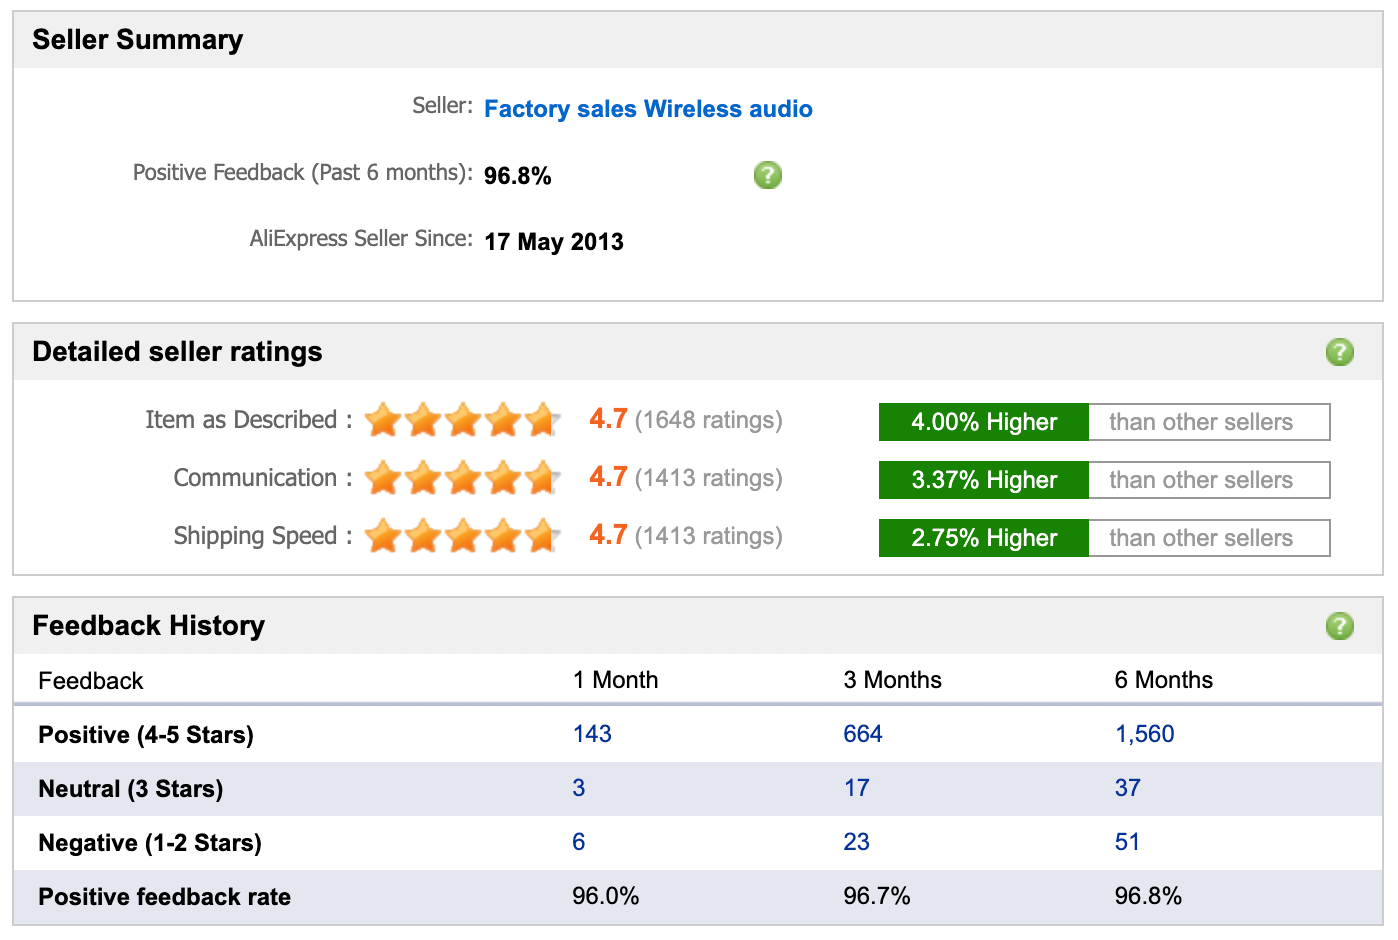 AliExpress seller summary dashboard with star ratings for shipping, communication, and item accuracy